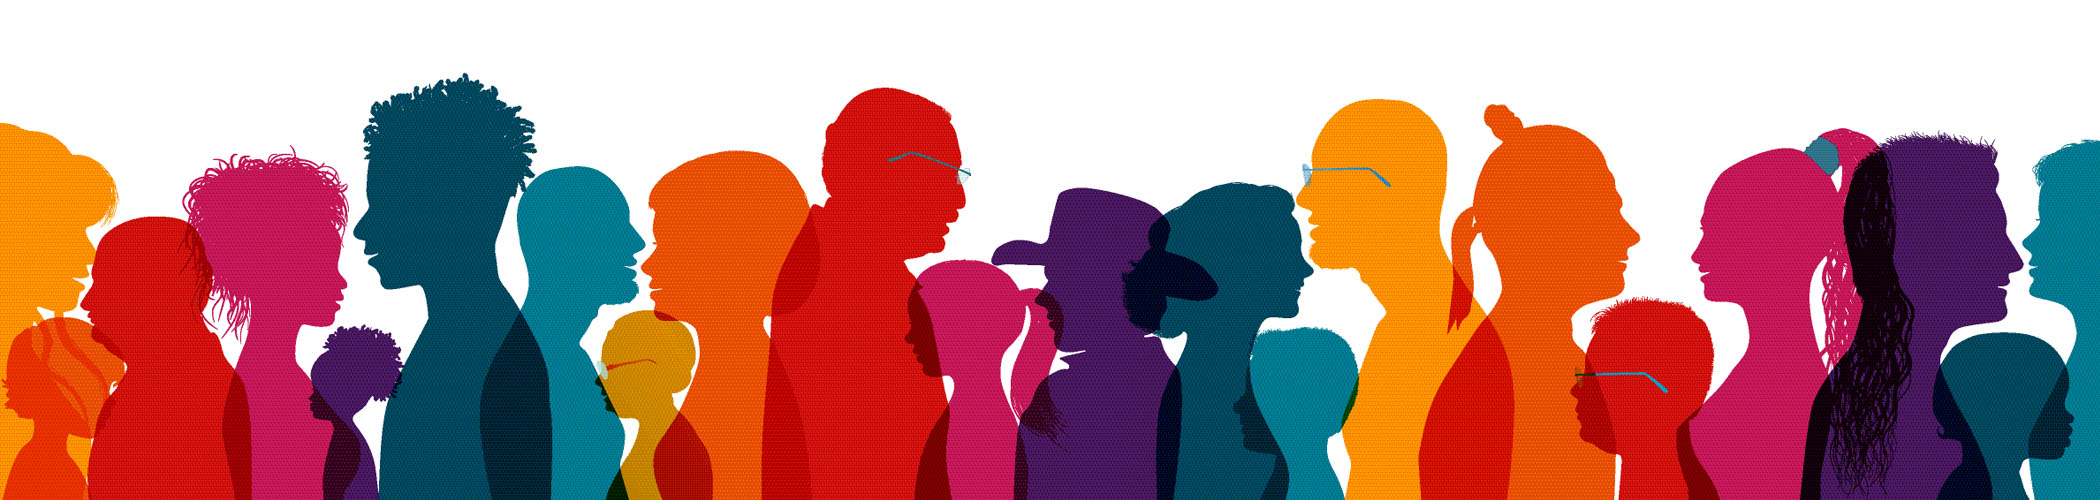 montage of diverse people silhouettes